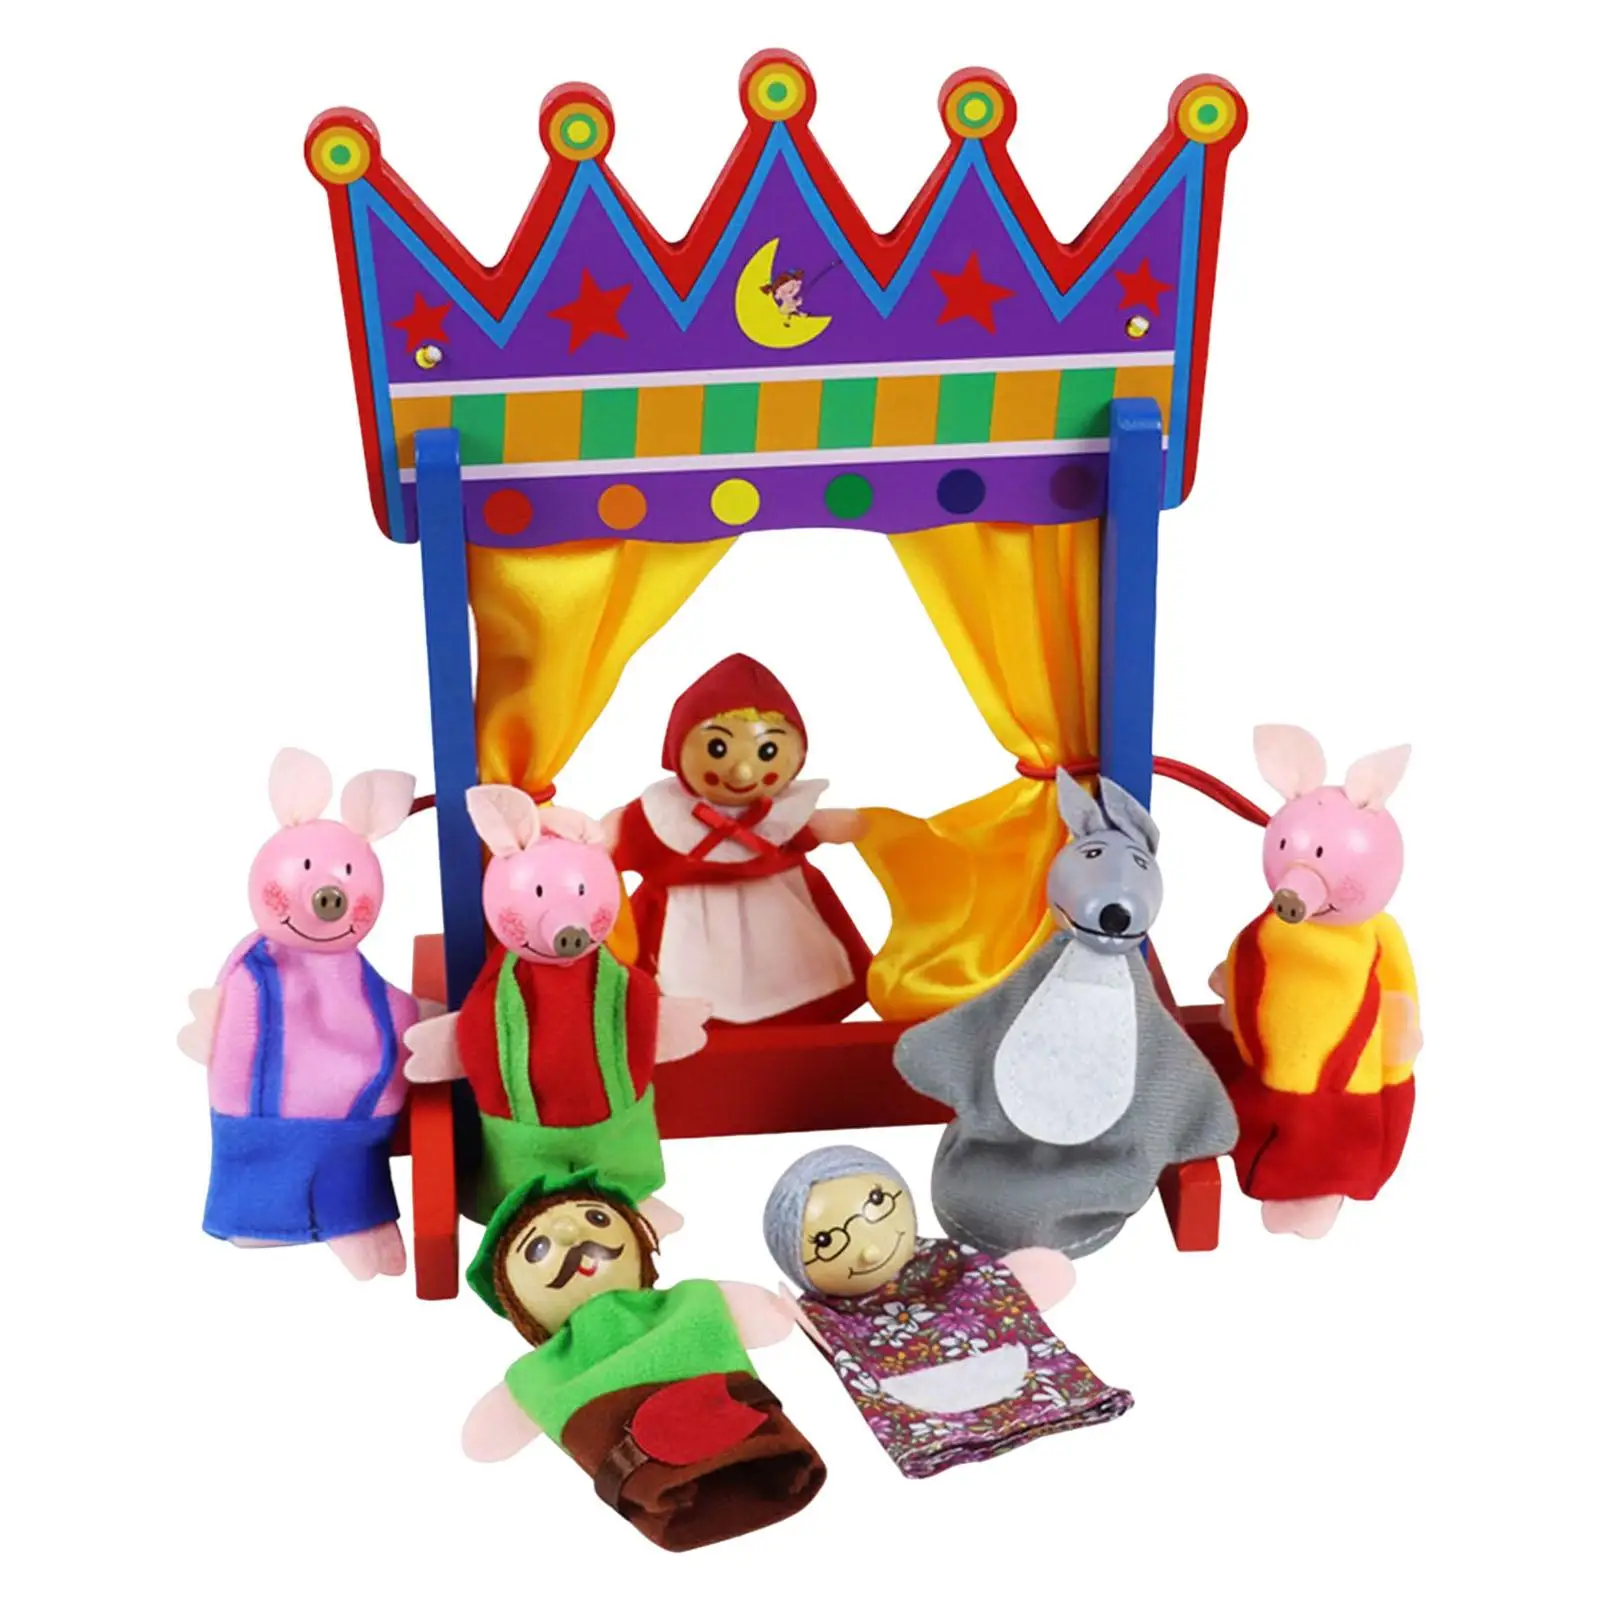 Simulation Mini Puppet Stand Set Educational Toys Decorations Model Finger Puppets for Preschool Story Telling Holiday Bookshelf